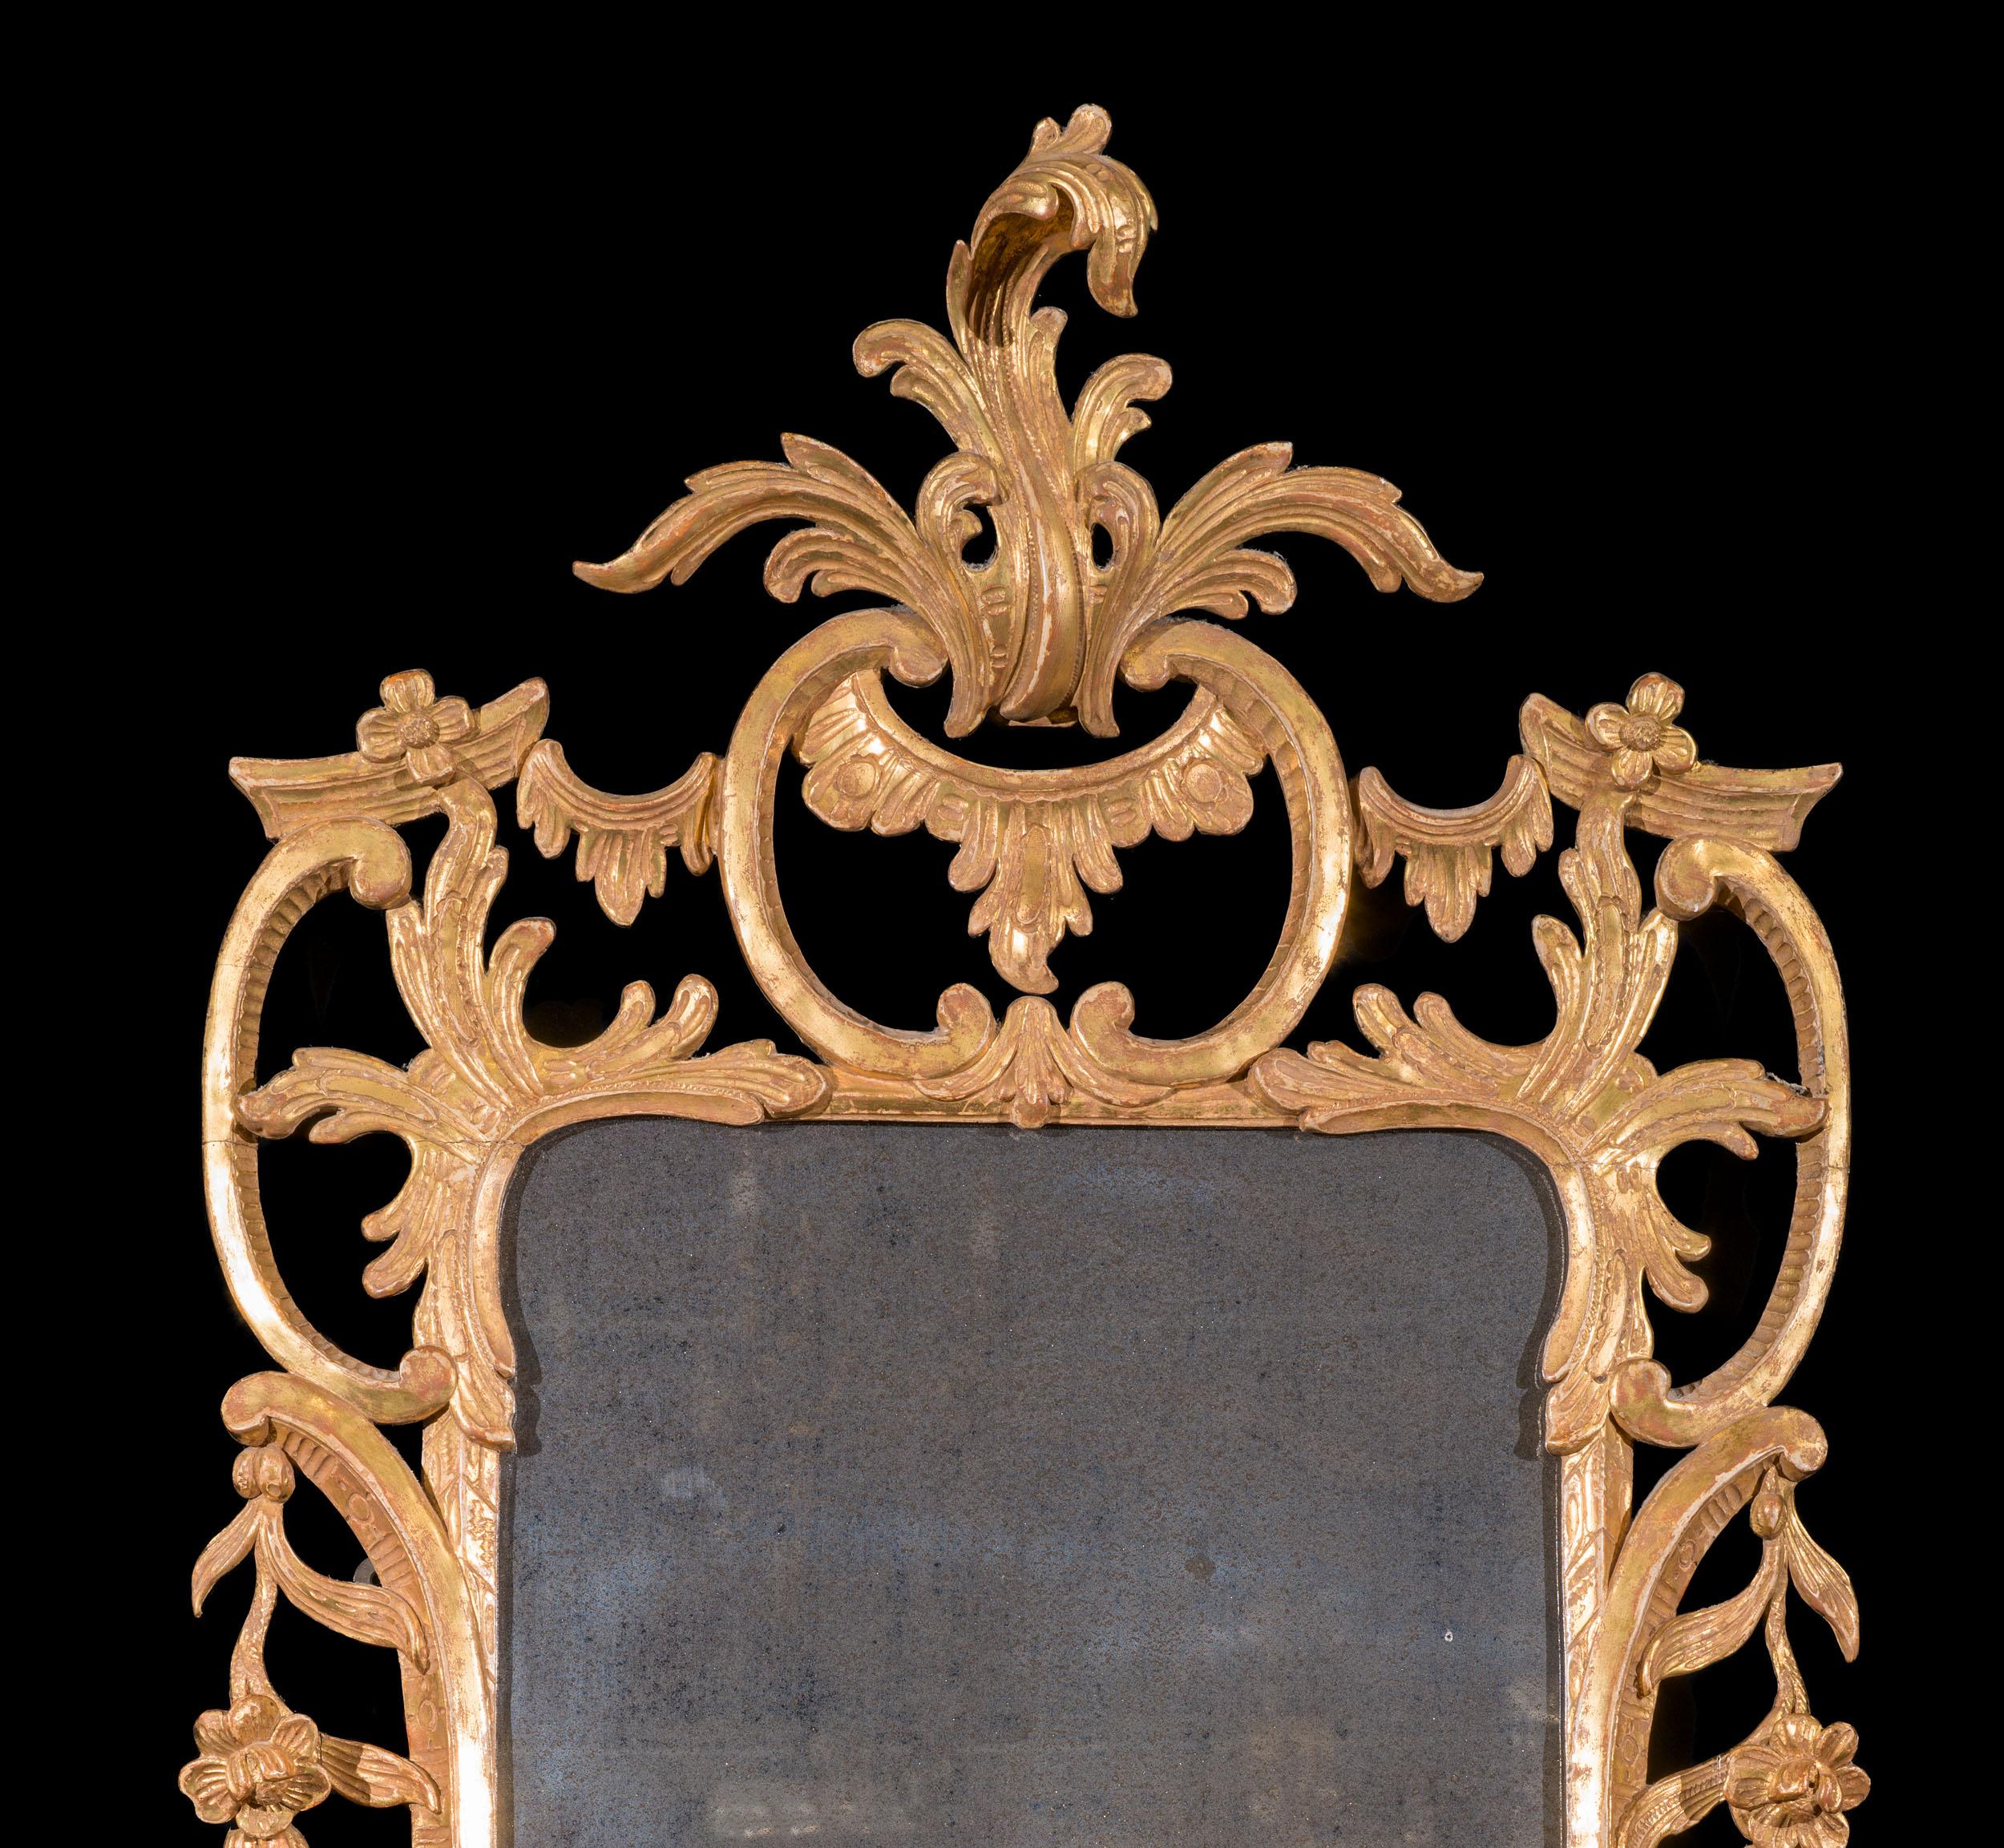 A fine gilt gesso George III wall mirror with delicate carving. The intricate frame has fine detailing throughout, including a well carved and delicate crest of foliate form and flowering vines and foliage within a framework of c scrolls. Mercury